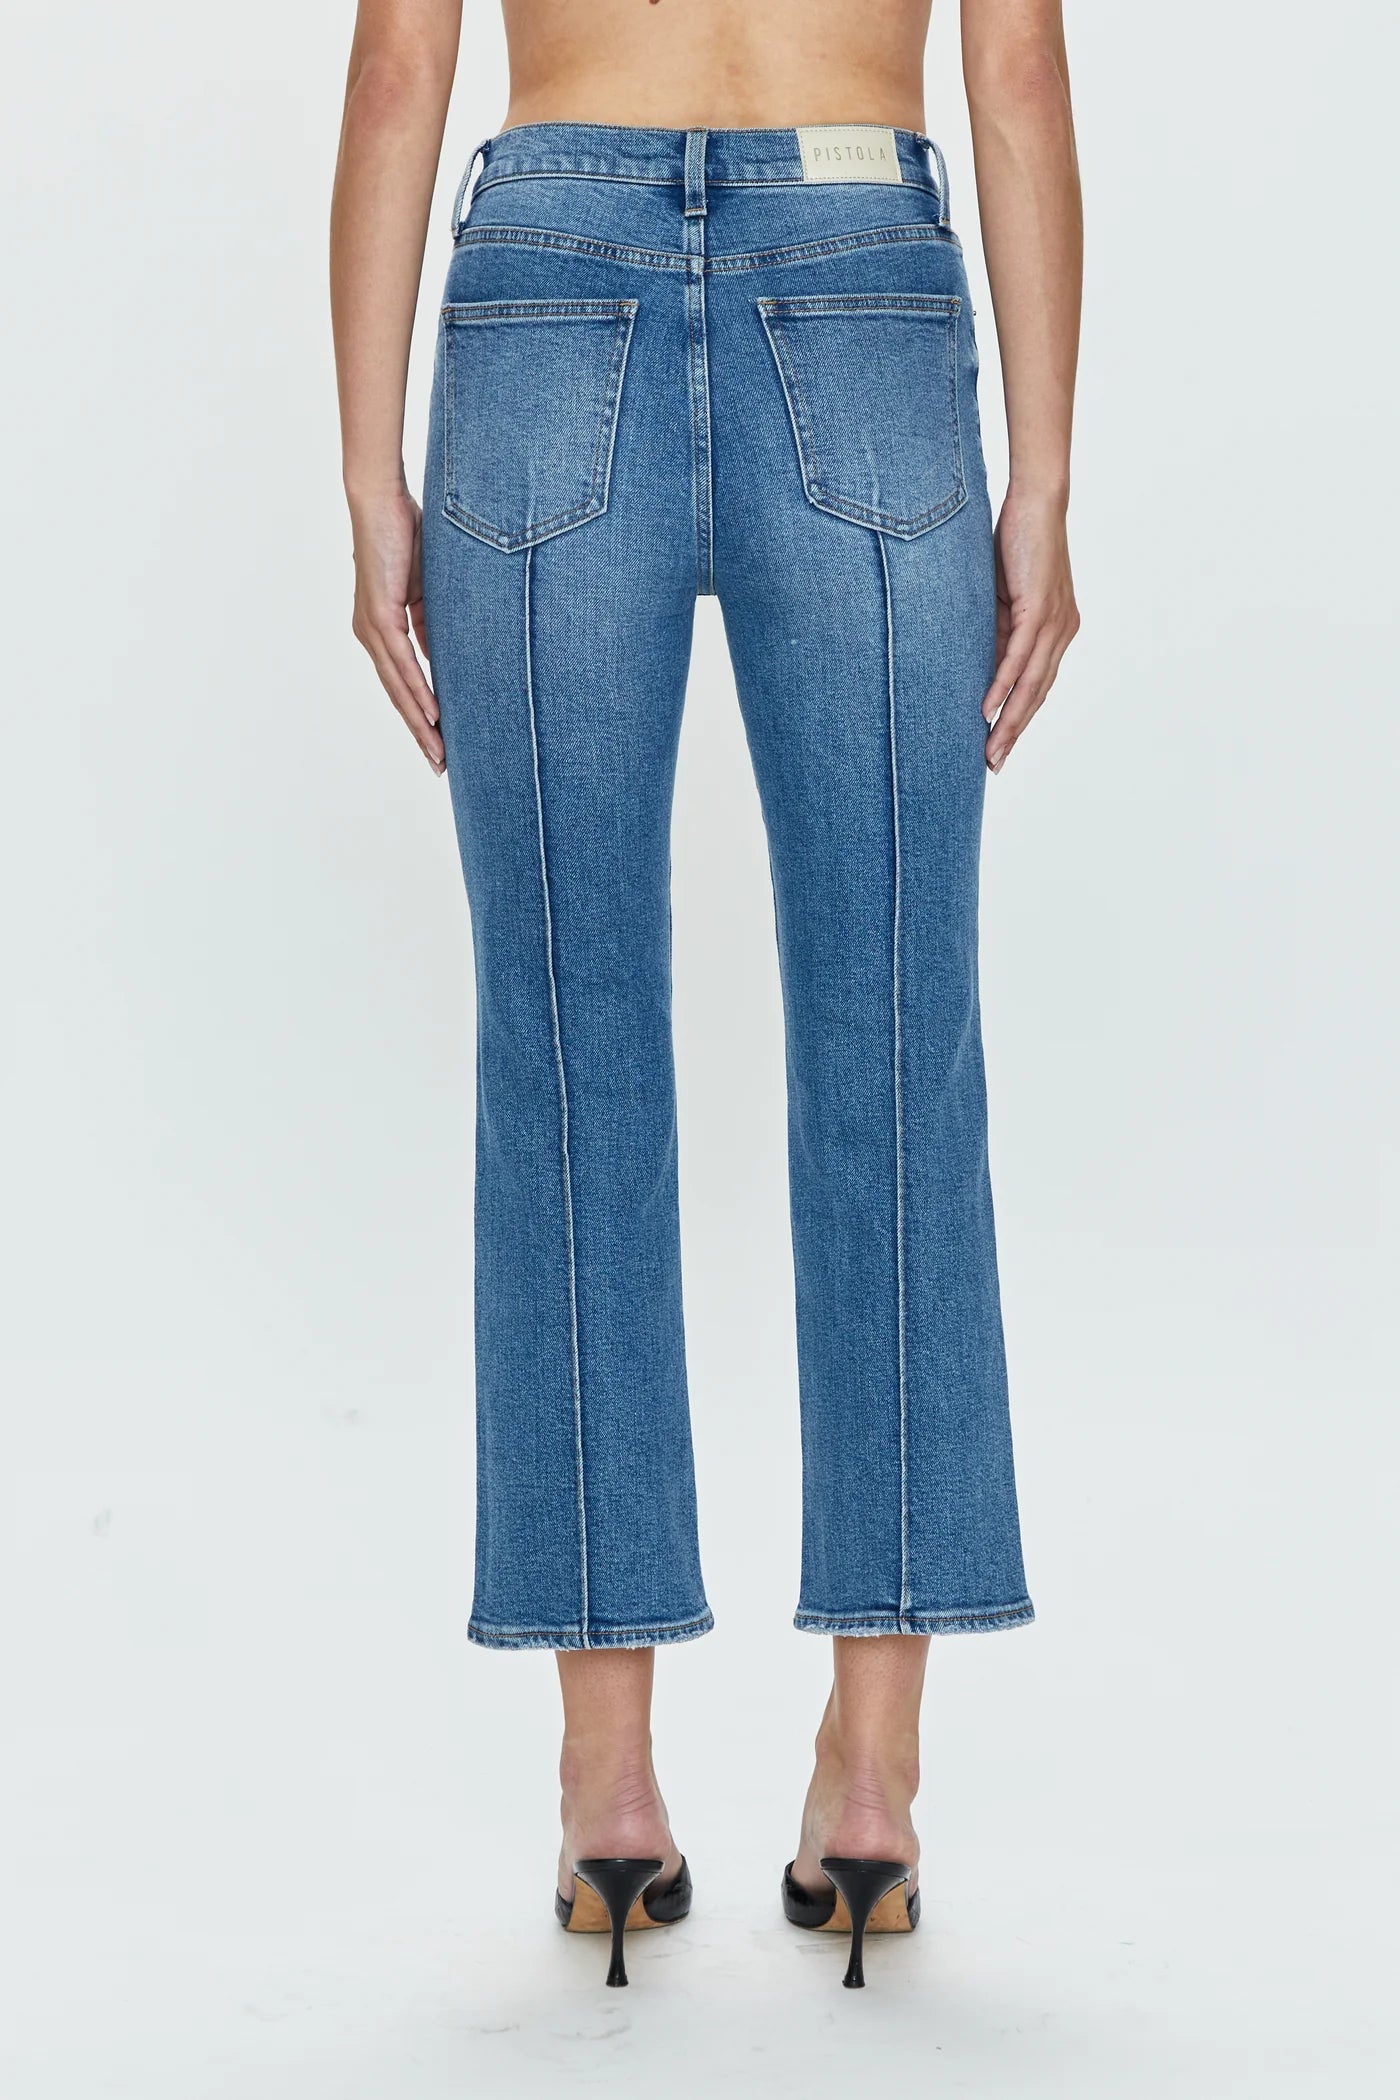 Back view of PISTOLA's Lennon High Rise Crop Boot Jeans in the color Essence